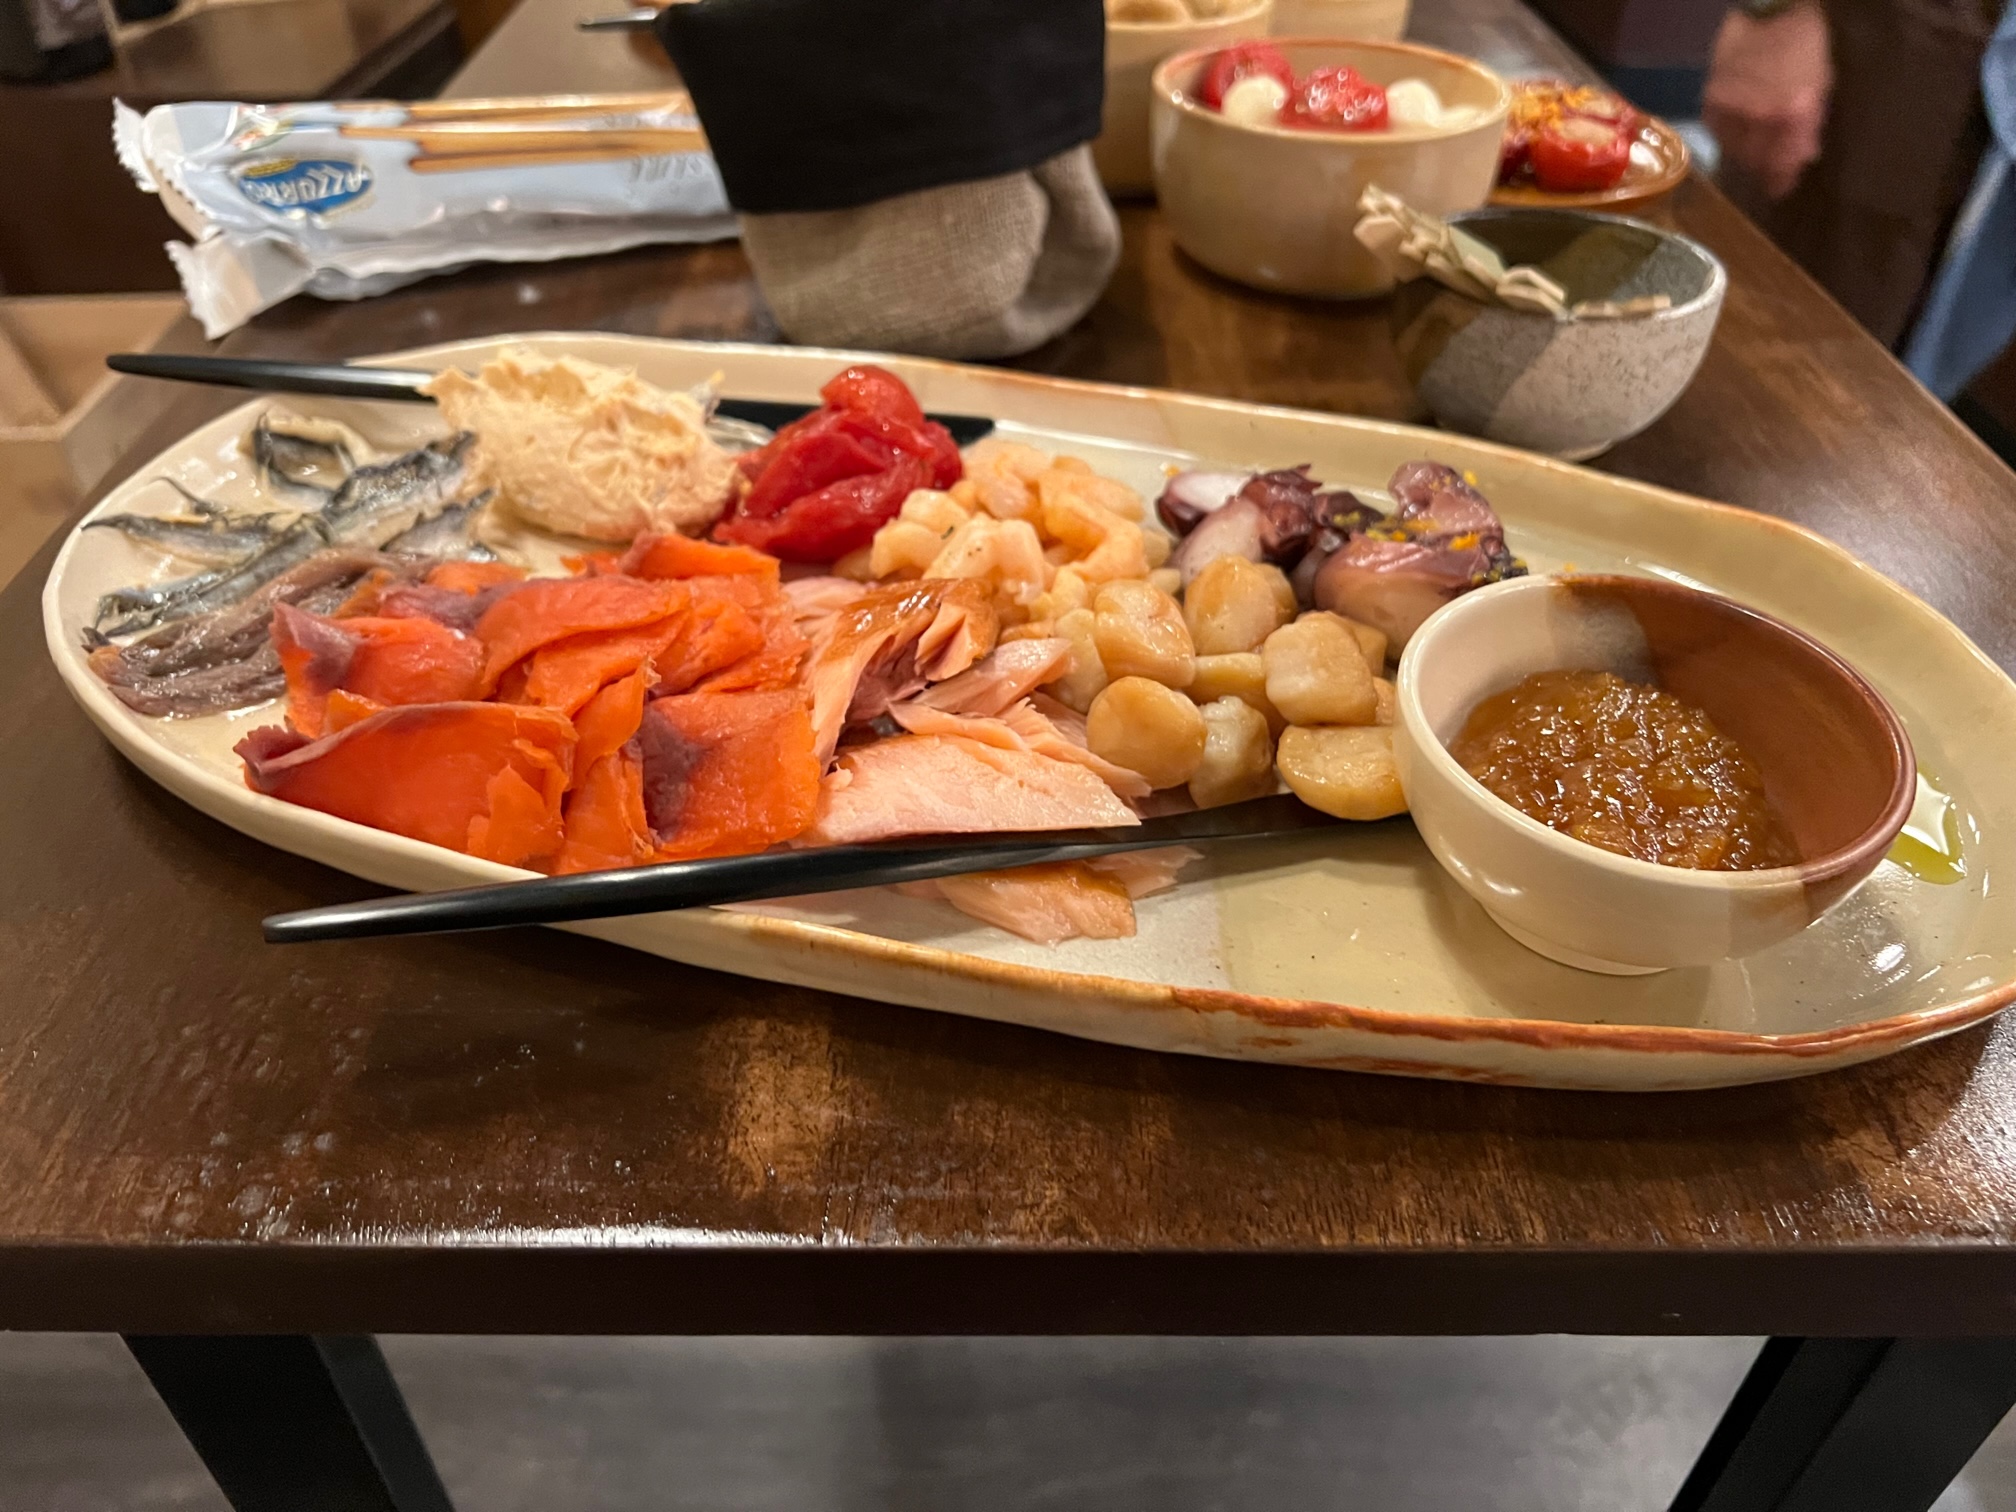 On a handmade platter, there is a selection of smoked seafood. Photo by Alyssa Buckley.